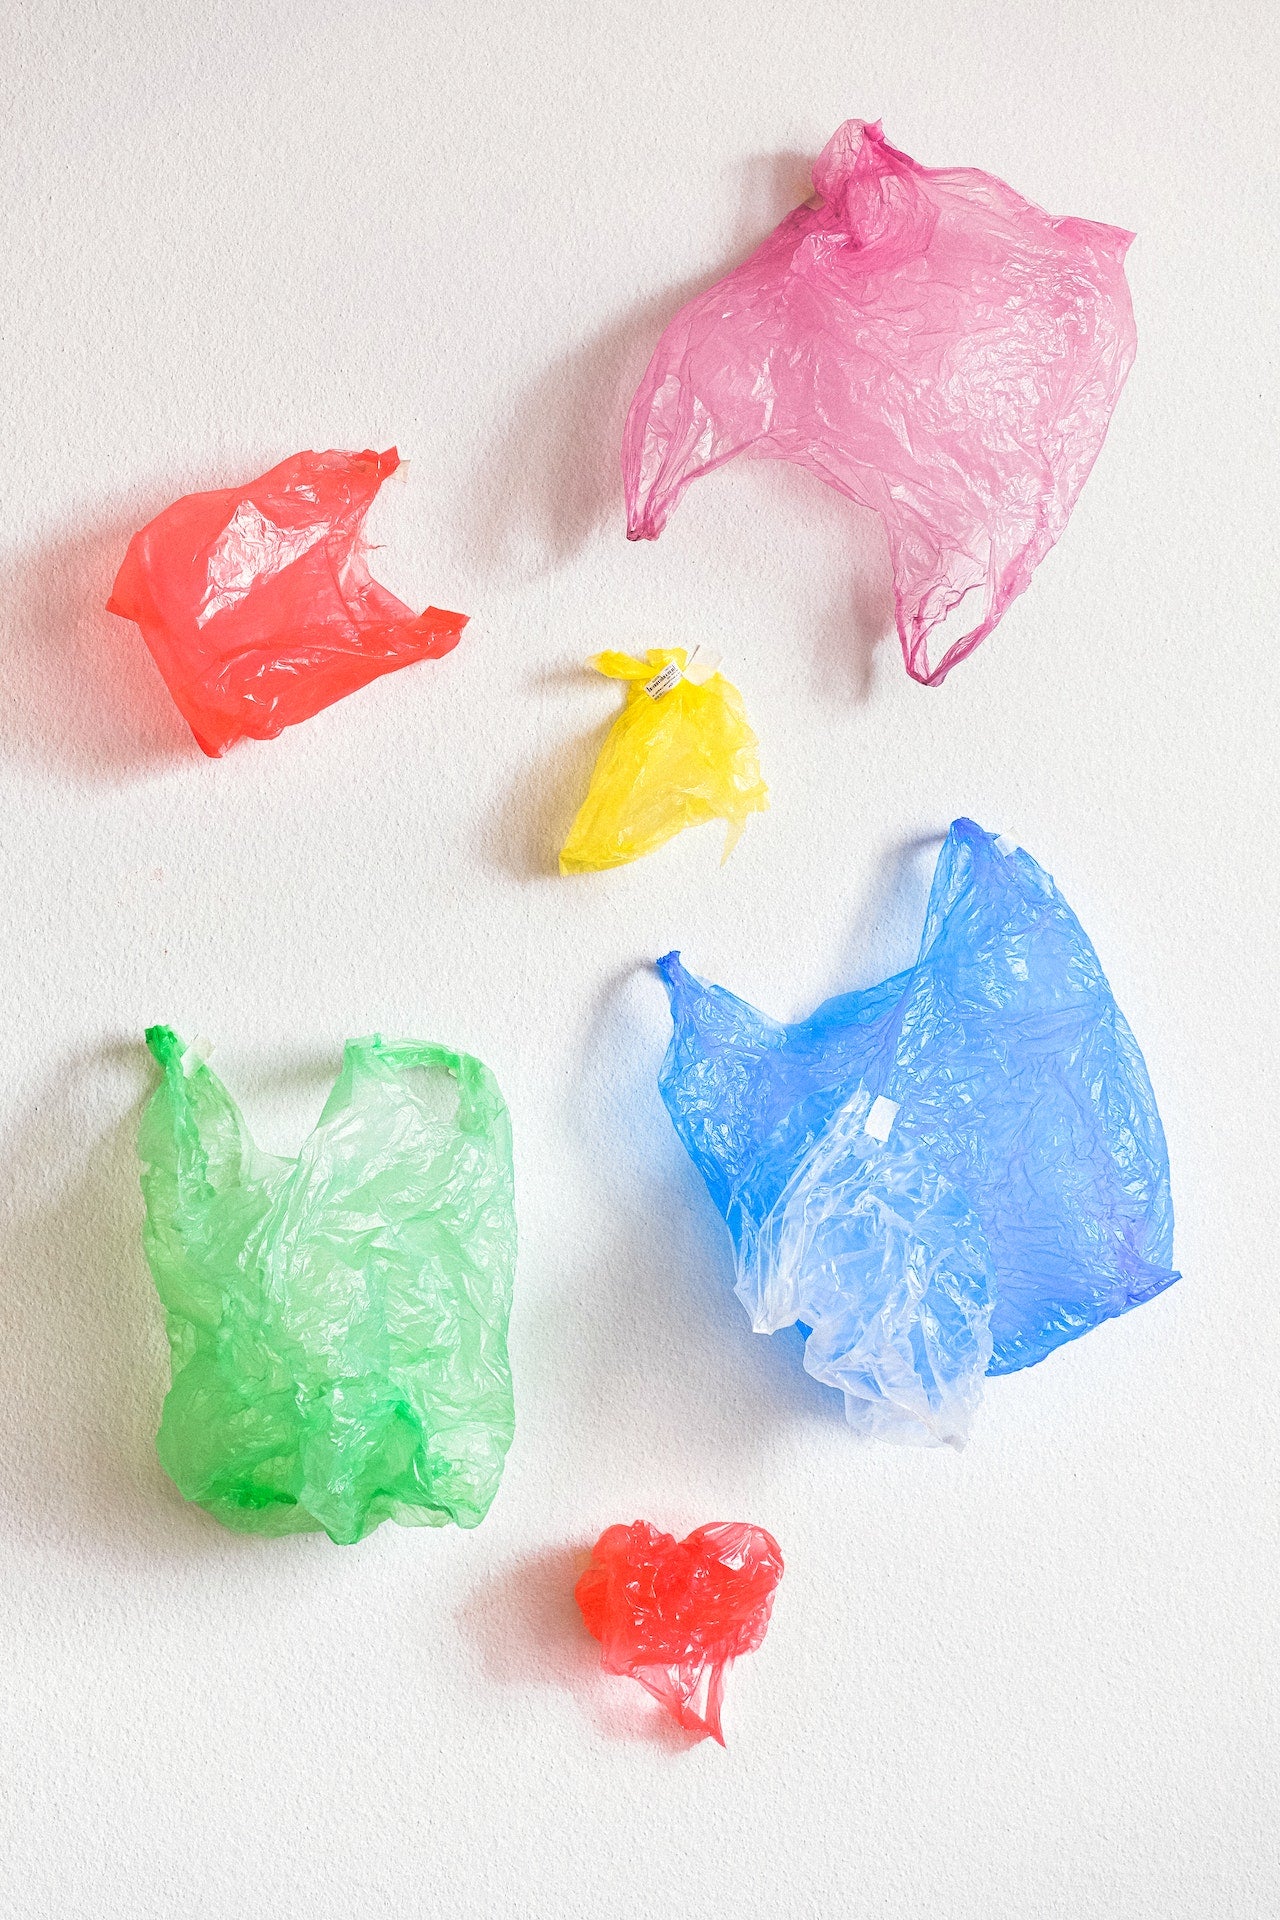 Colored Trash Bags: More than What Meets the Eye